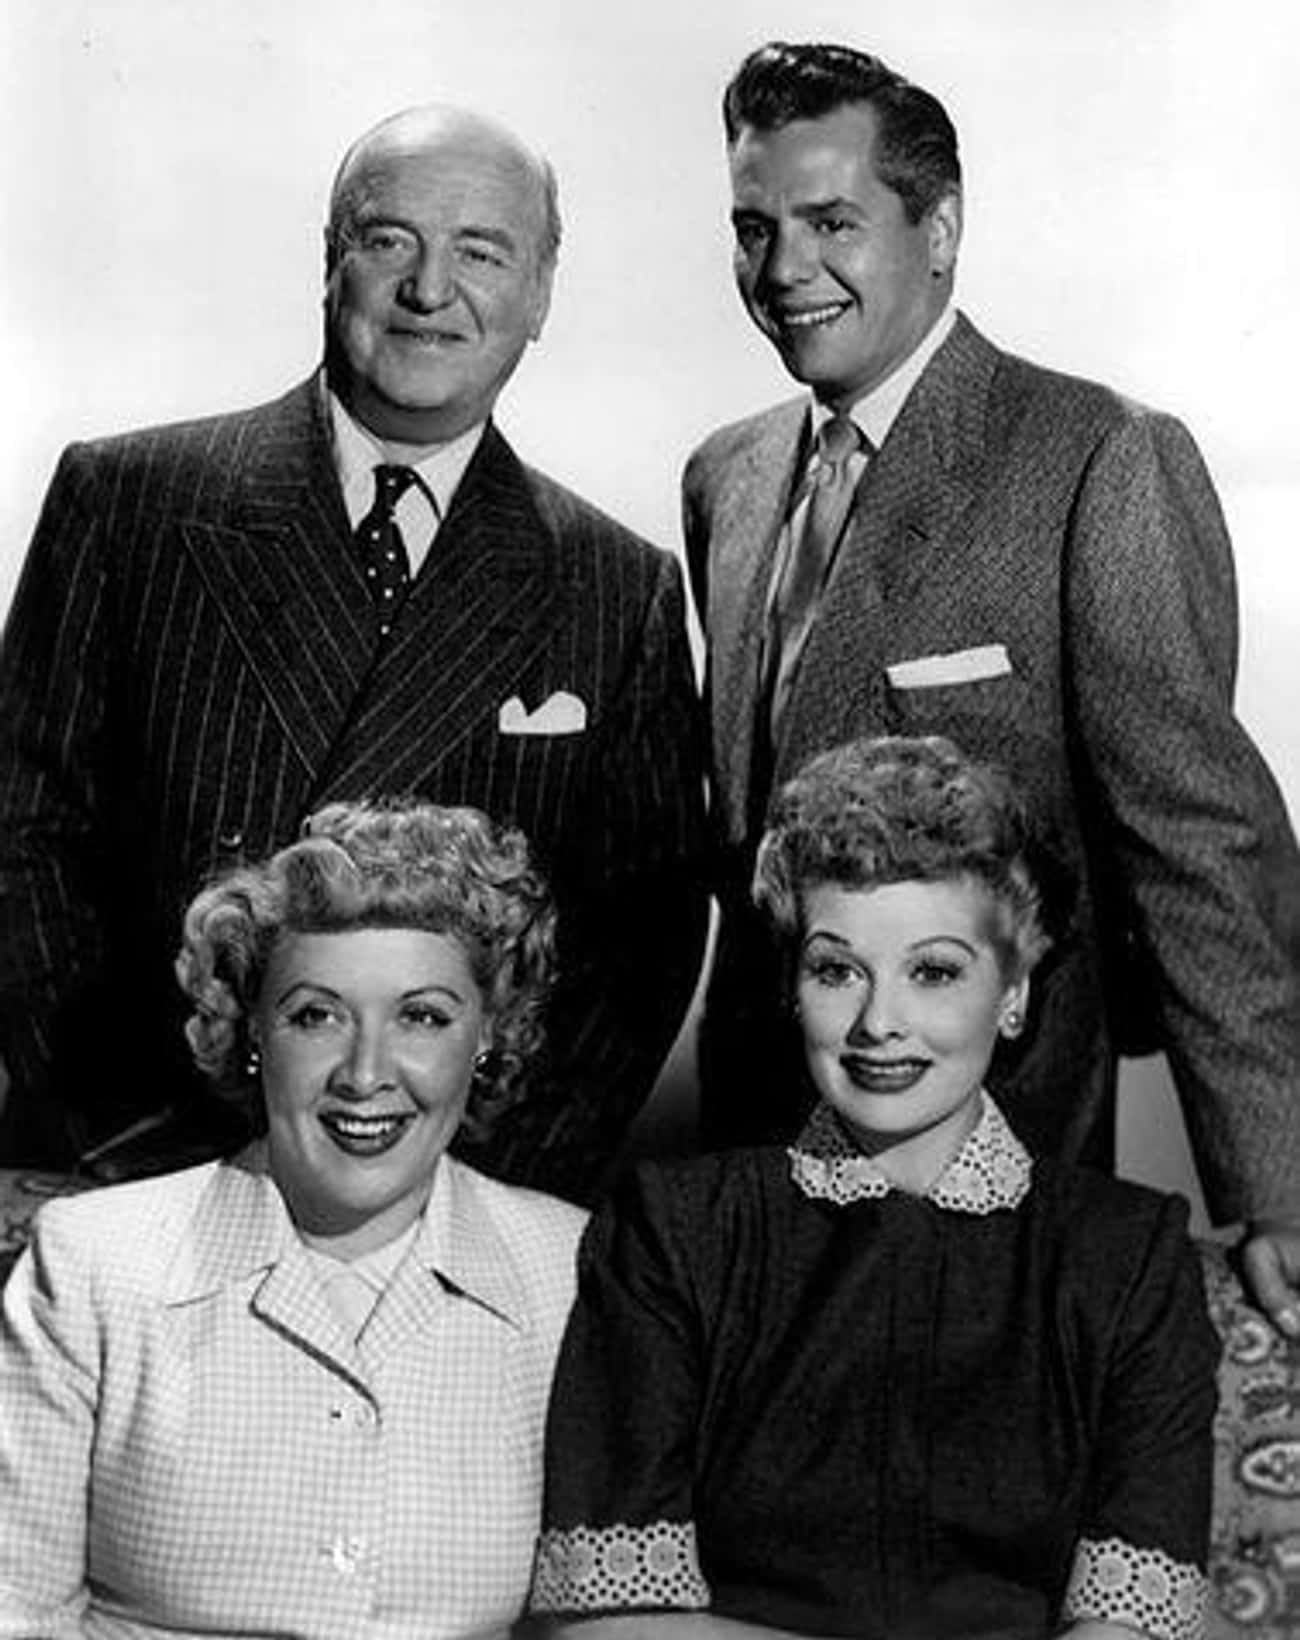 Vivian Vance Reportedly Resented Being Tied To William Frawley